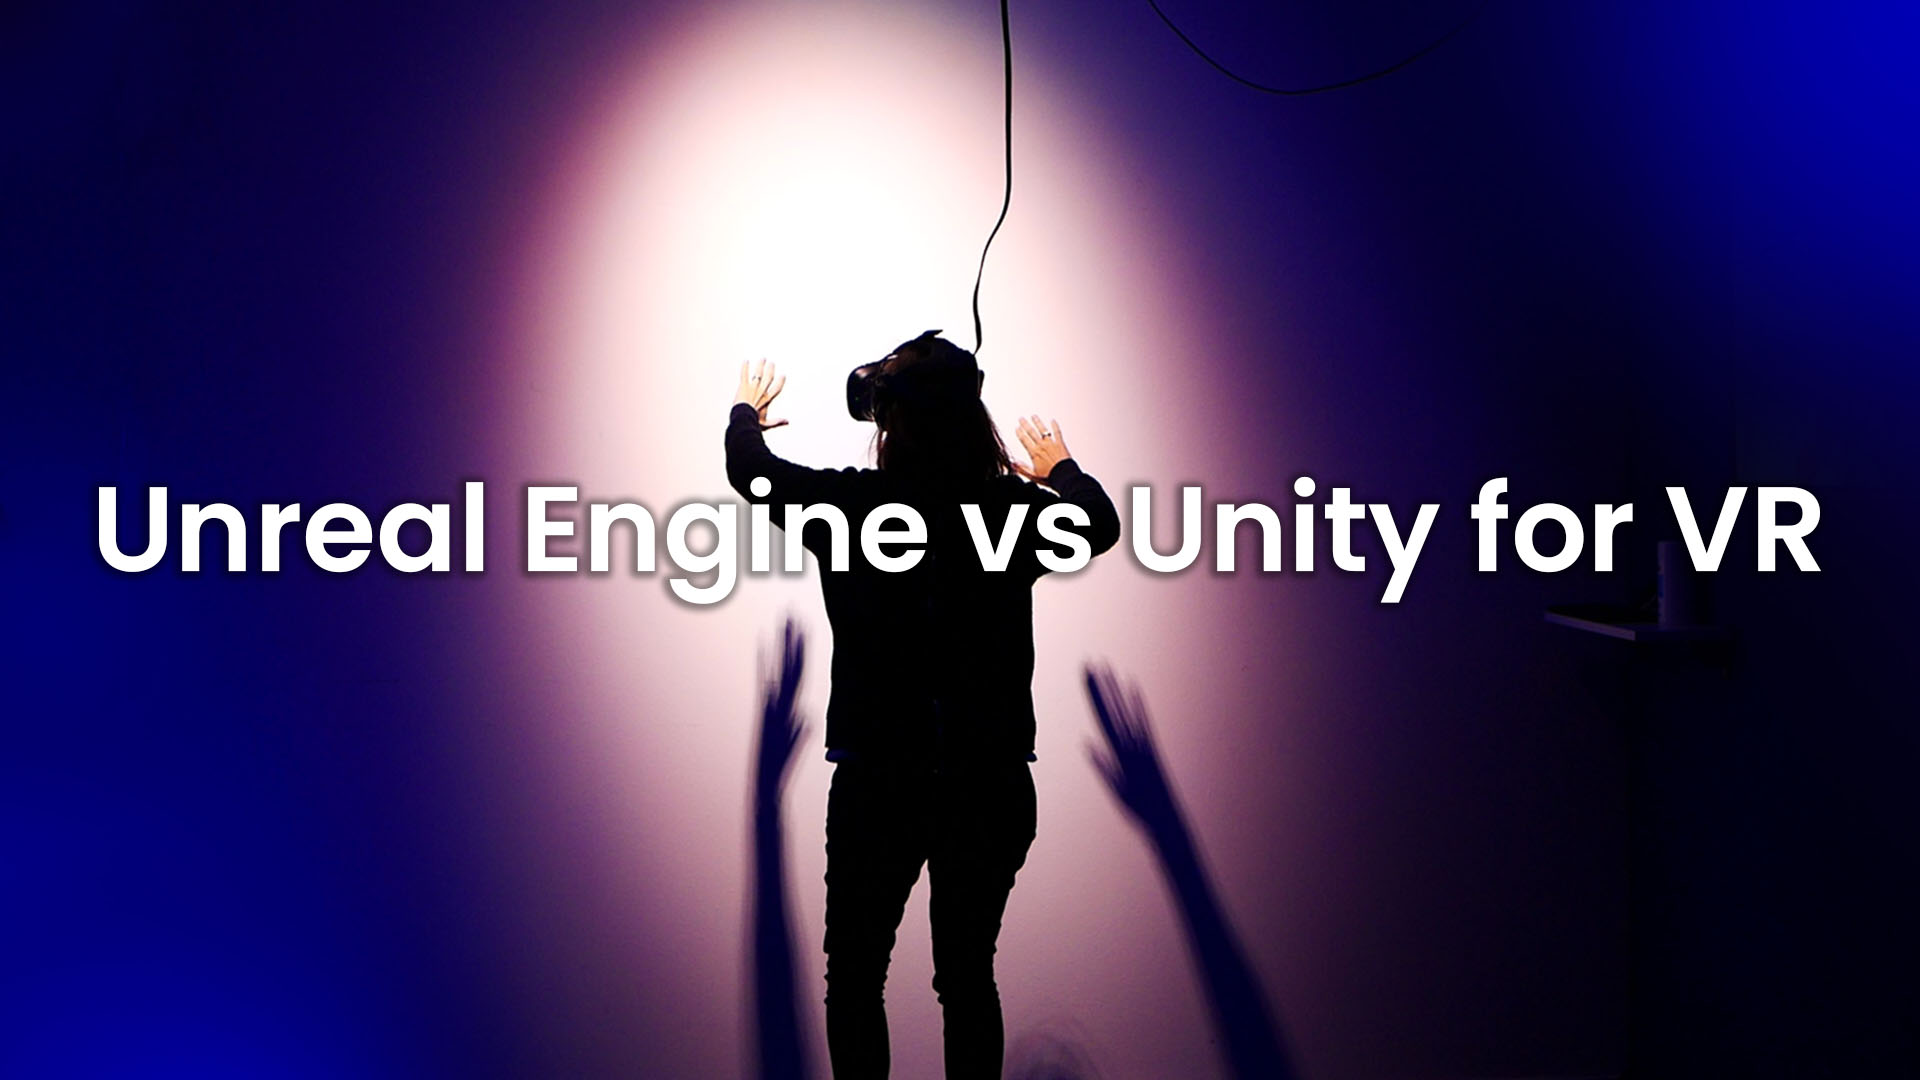 Unreal Engine vs Unity for VR